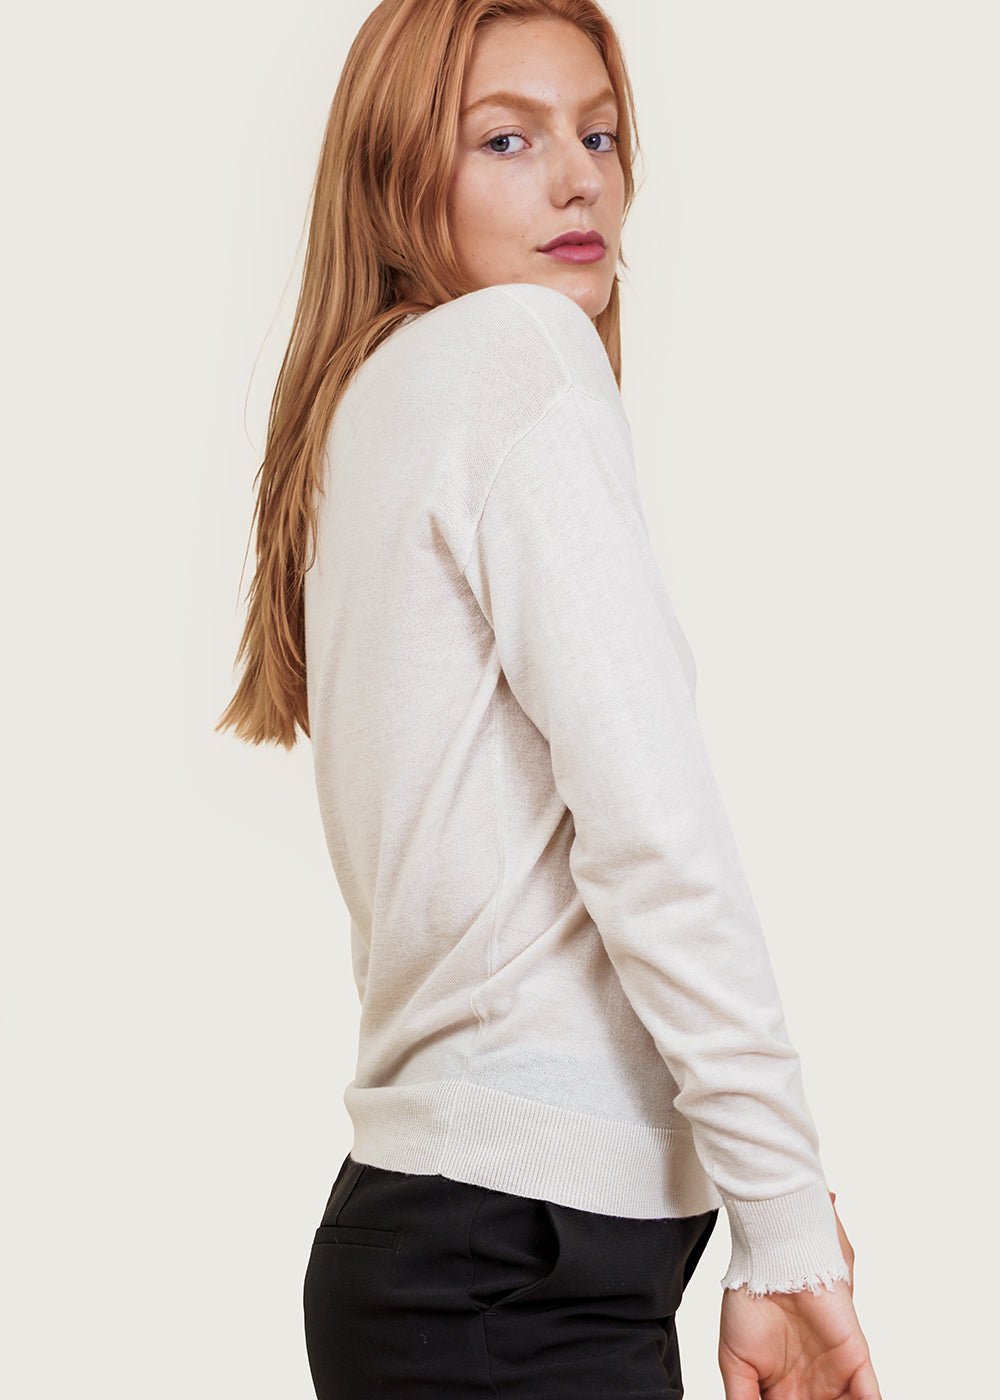 Frayed R-Neck Top in Ivory by FILIPPA K – New Classics Studios